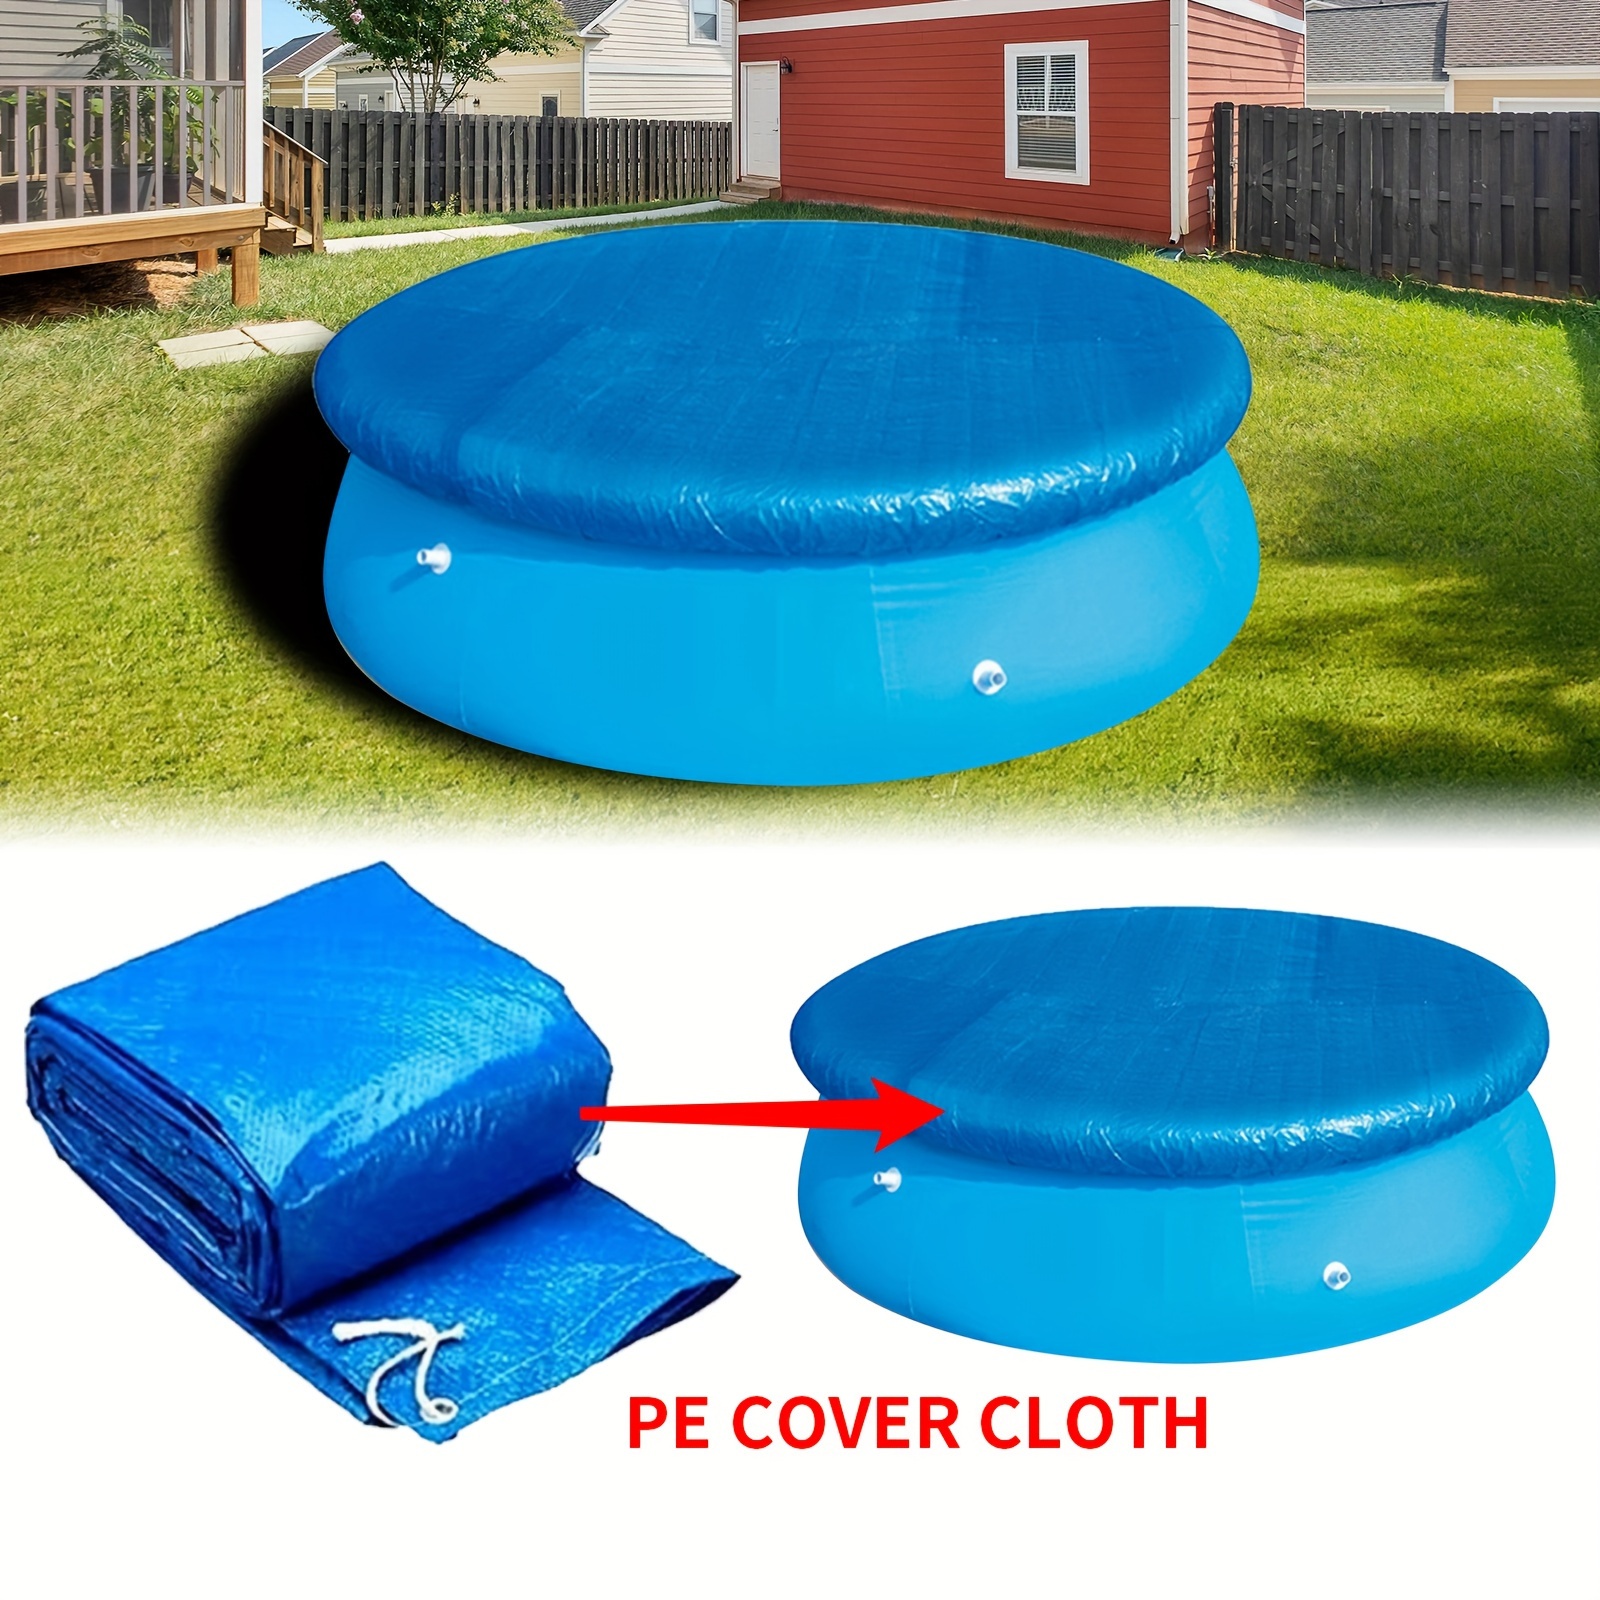 

Round Pvc Pool Cover With Drawstring - Durable Mesh Cloth Pad For Above Ground Swimming Pools, Outdoor Yard Accessory